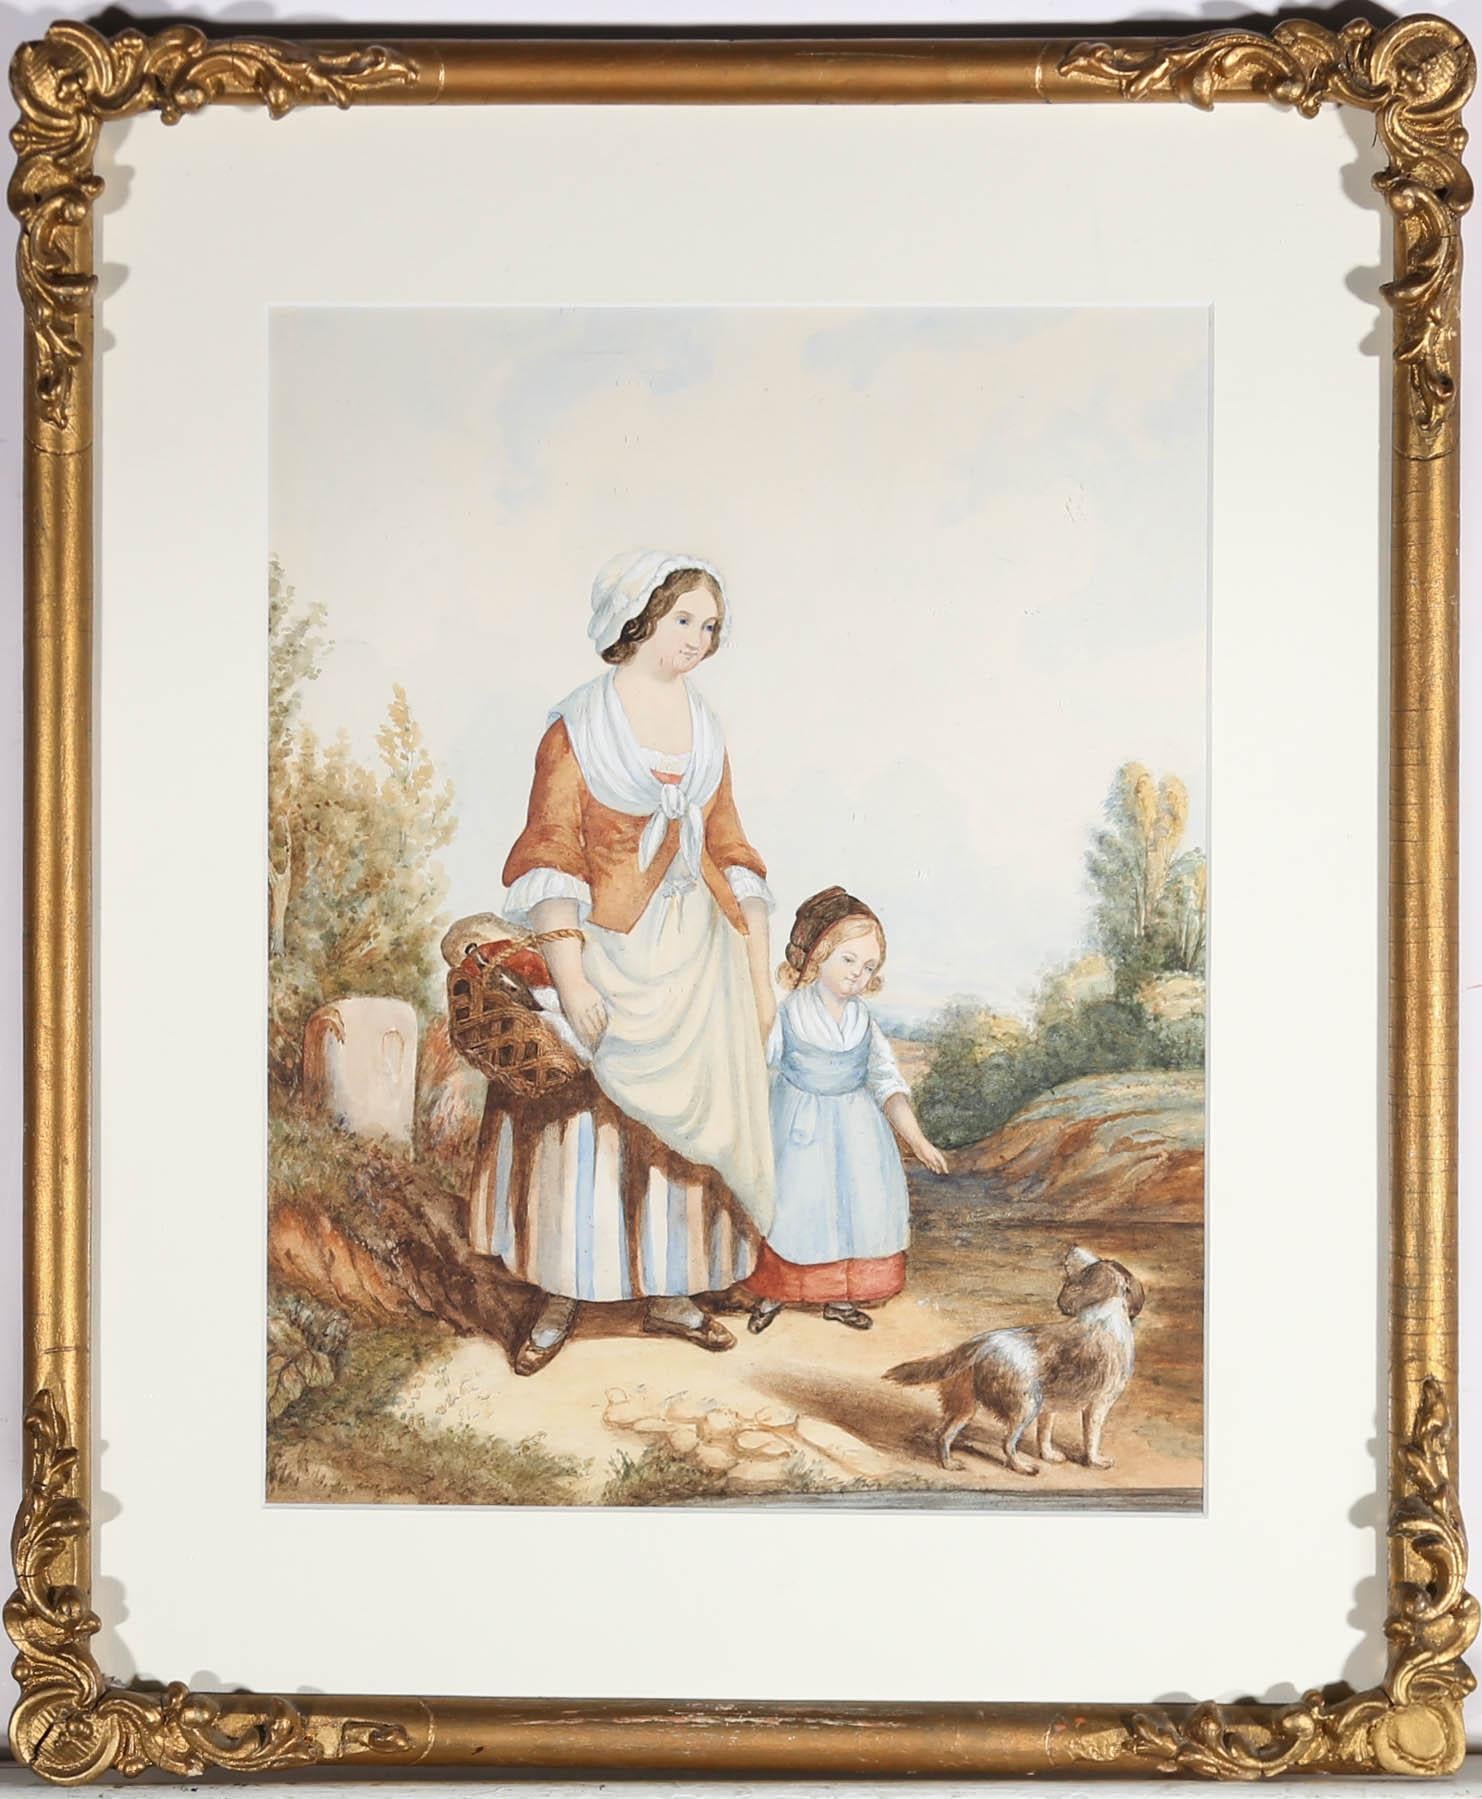 This delightful watercolour study depicts a mother and daughter and in hand on a country path. Both figures looks down to the small dog in front of them as the child gently reaches out to it. Painted in fine watercolour detail. Signed and dated